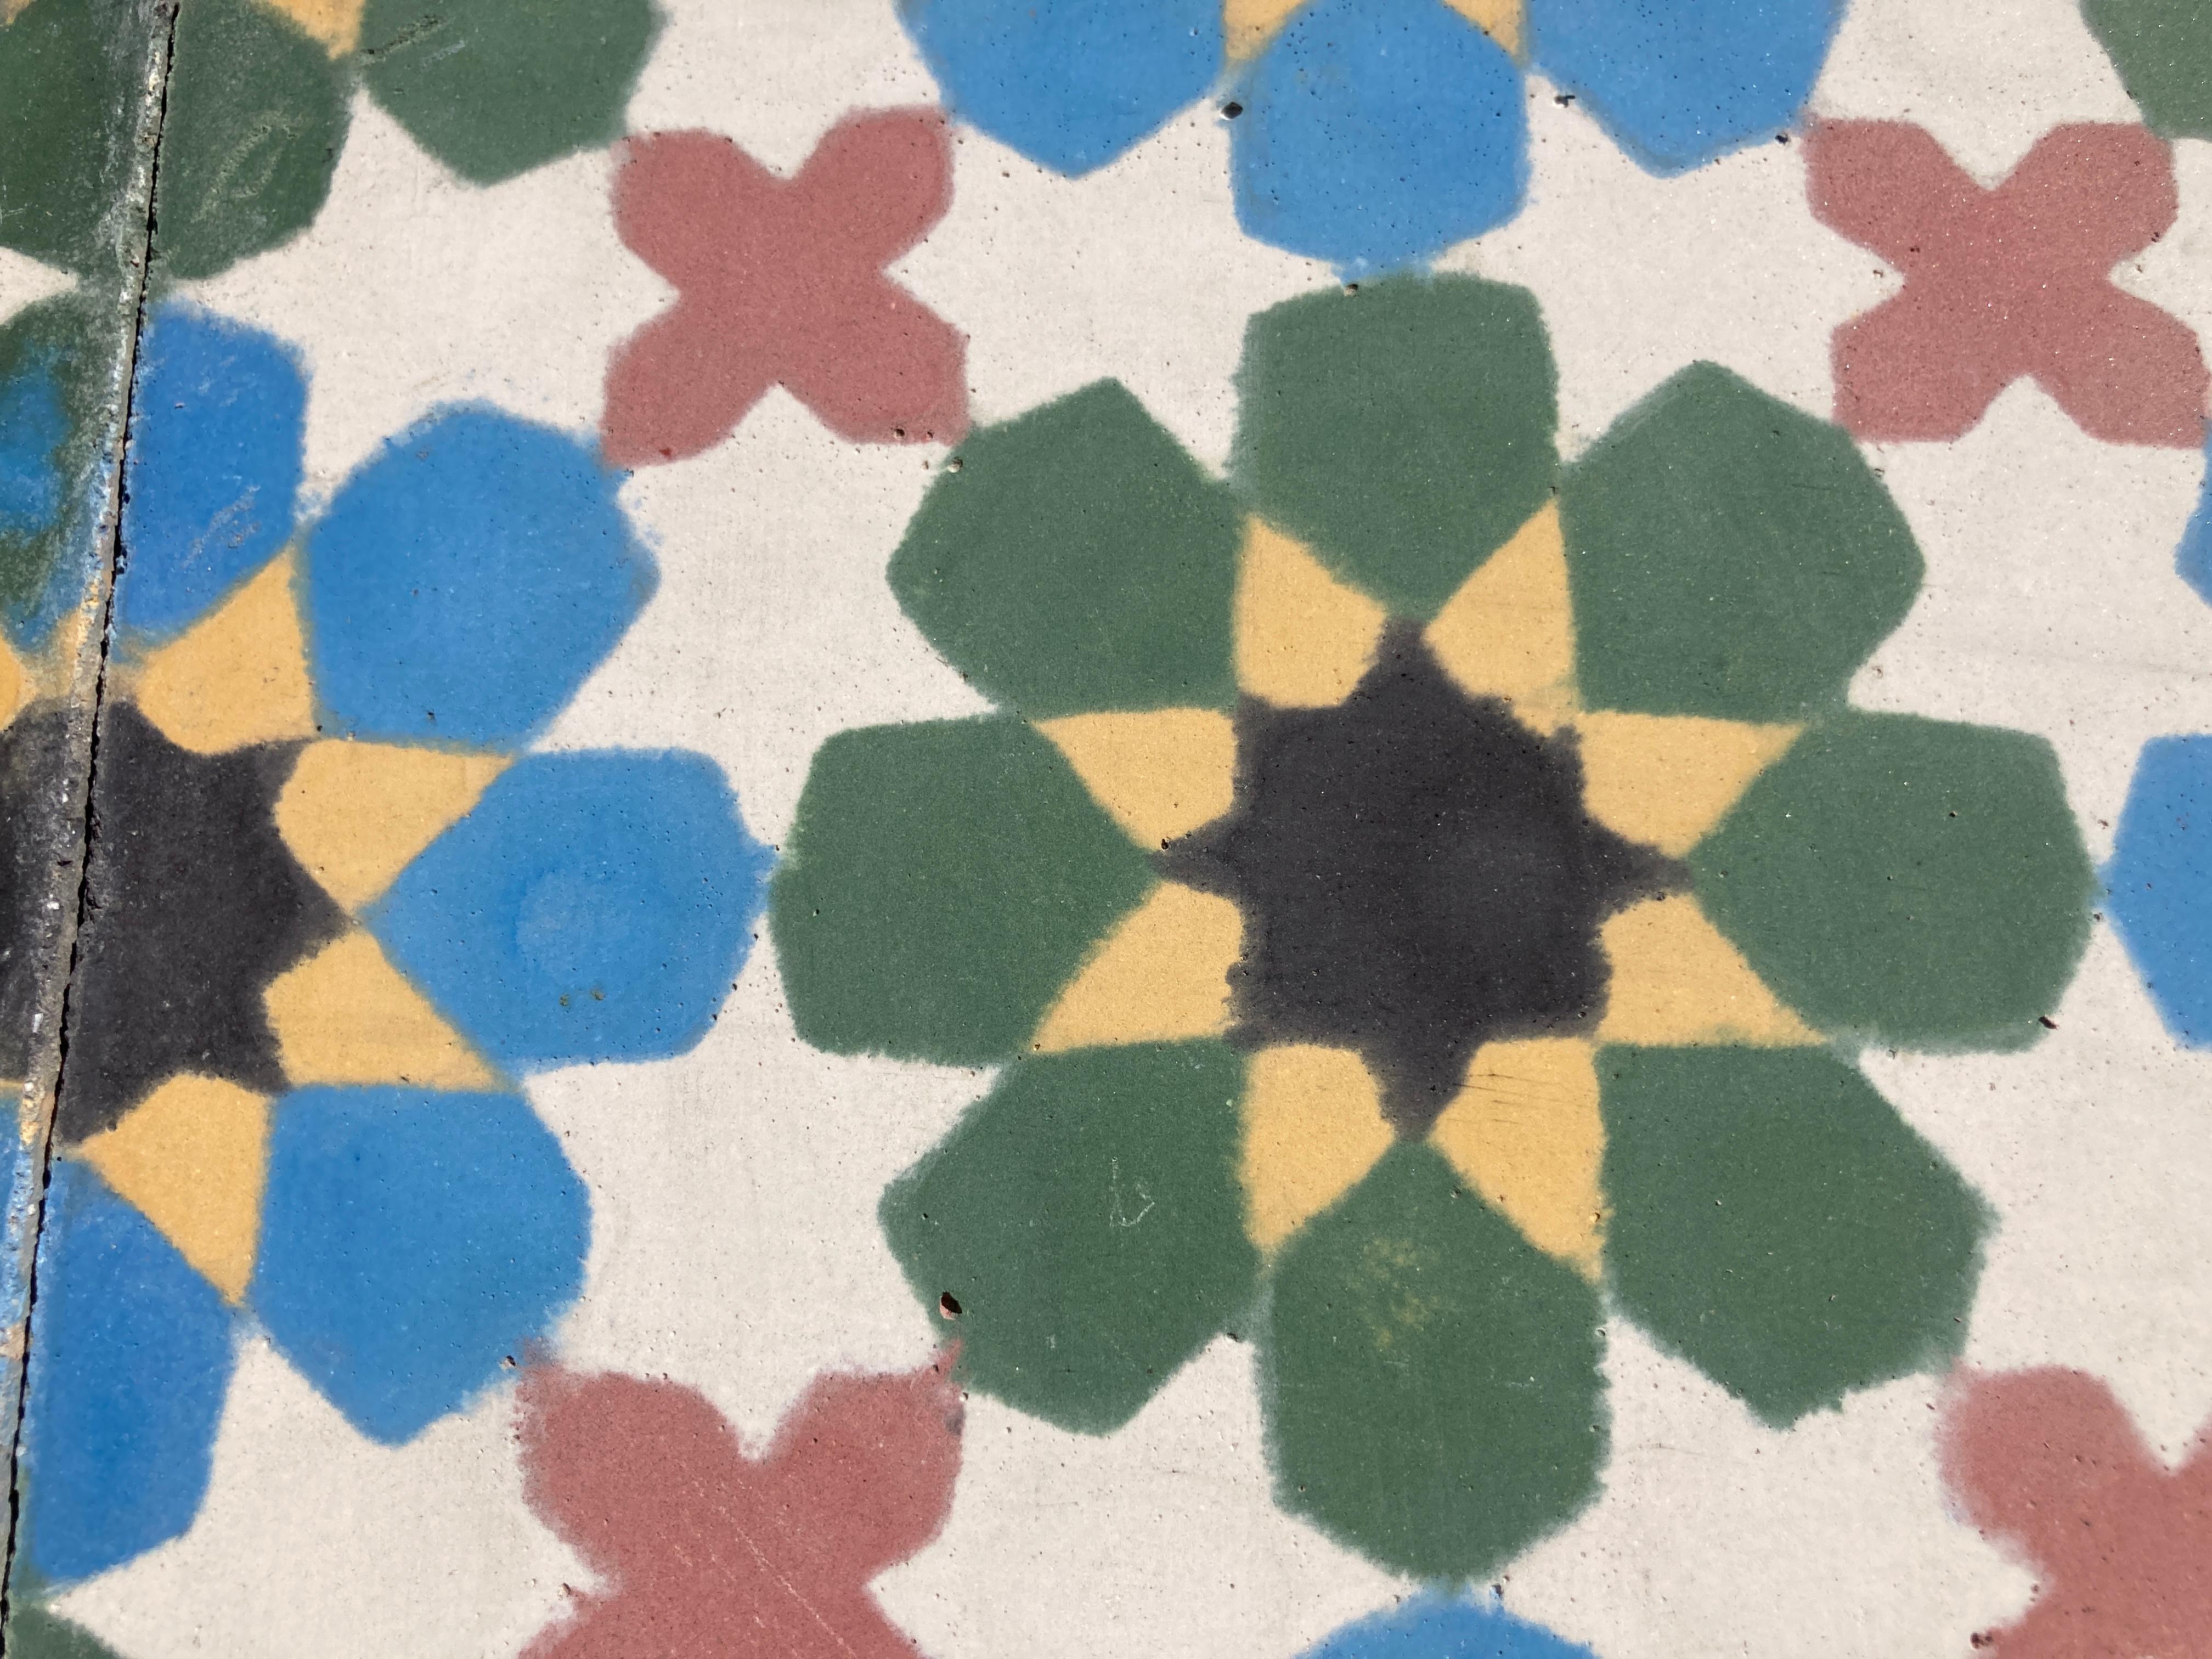 Hand-Painted Moroccan Hand-Crafted Encaustic Cement Tiles with Traditional Fez Moorish Design